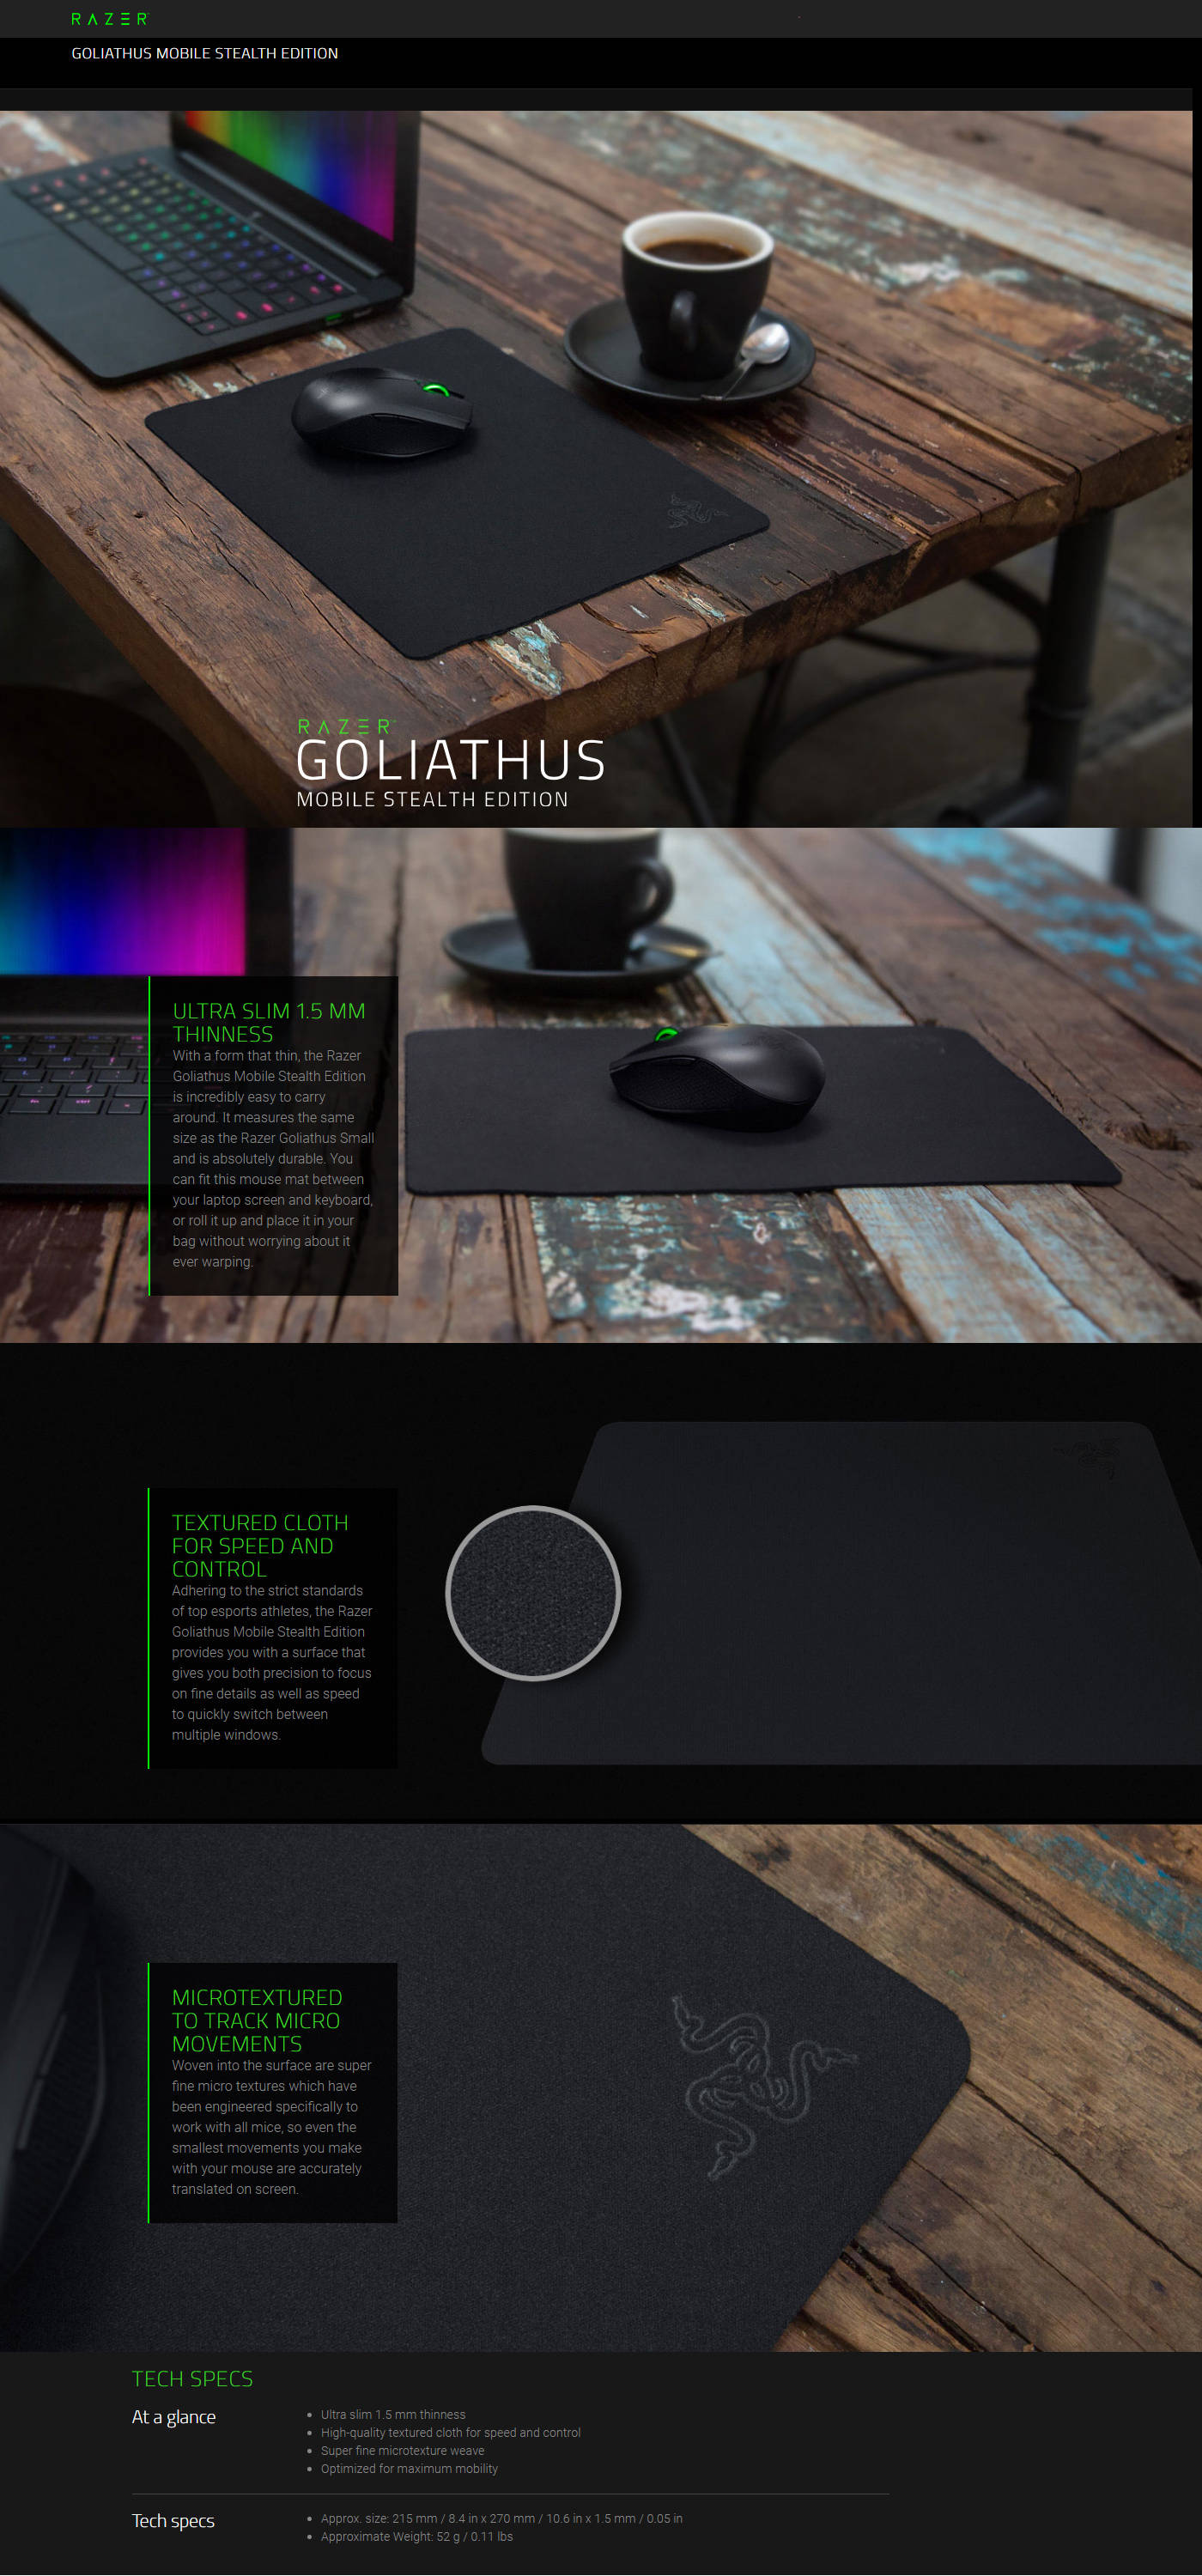  Buy Online Razer Goliathus Mobile Stealth Edition Soft Gaming Mouse Mat Small (RZ02-01820500-R3M1)